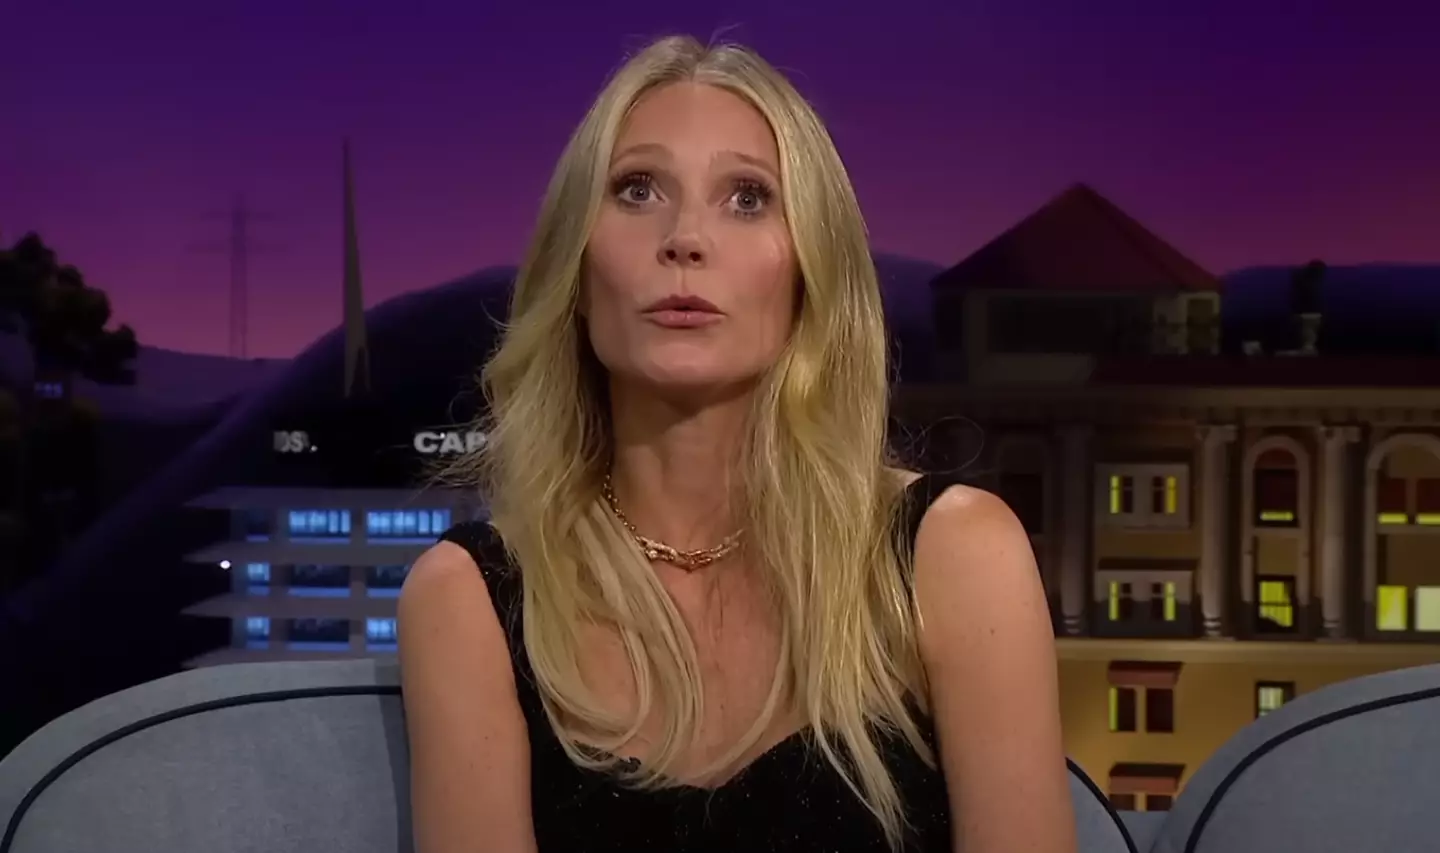 Paltrow spoke about the glory days on The Late Late Show with James Corden.